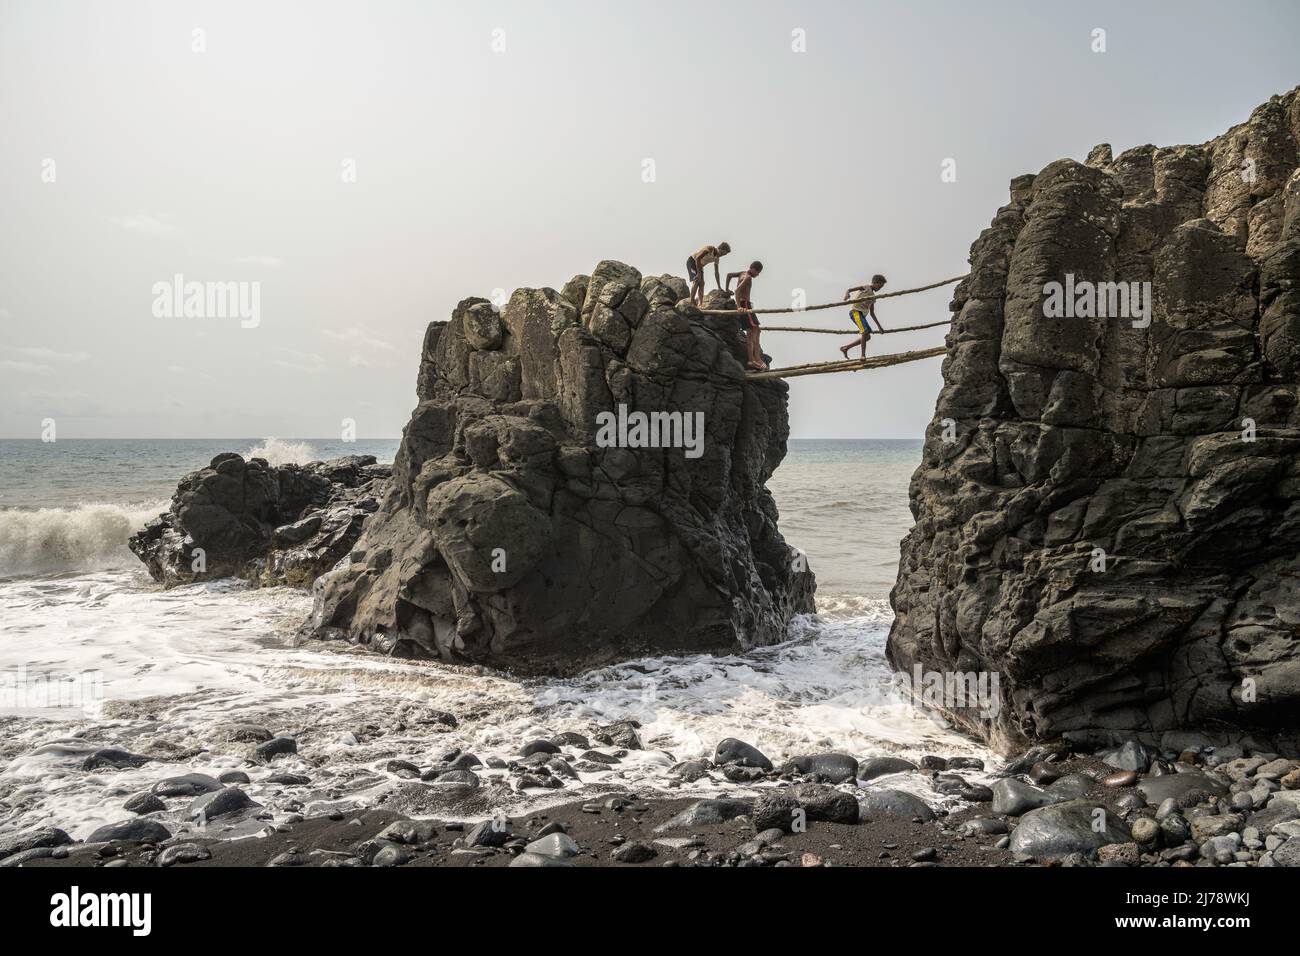 Children crossing a precarious bridge made of logs while the waves beat on the rocks. Stock Photo